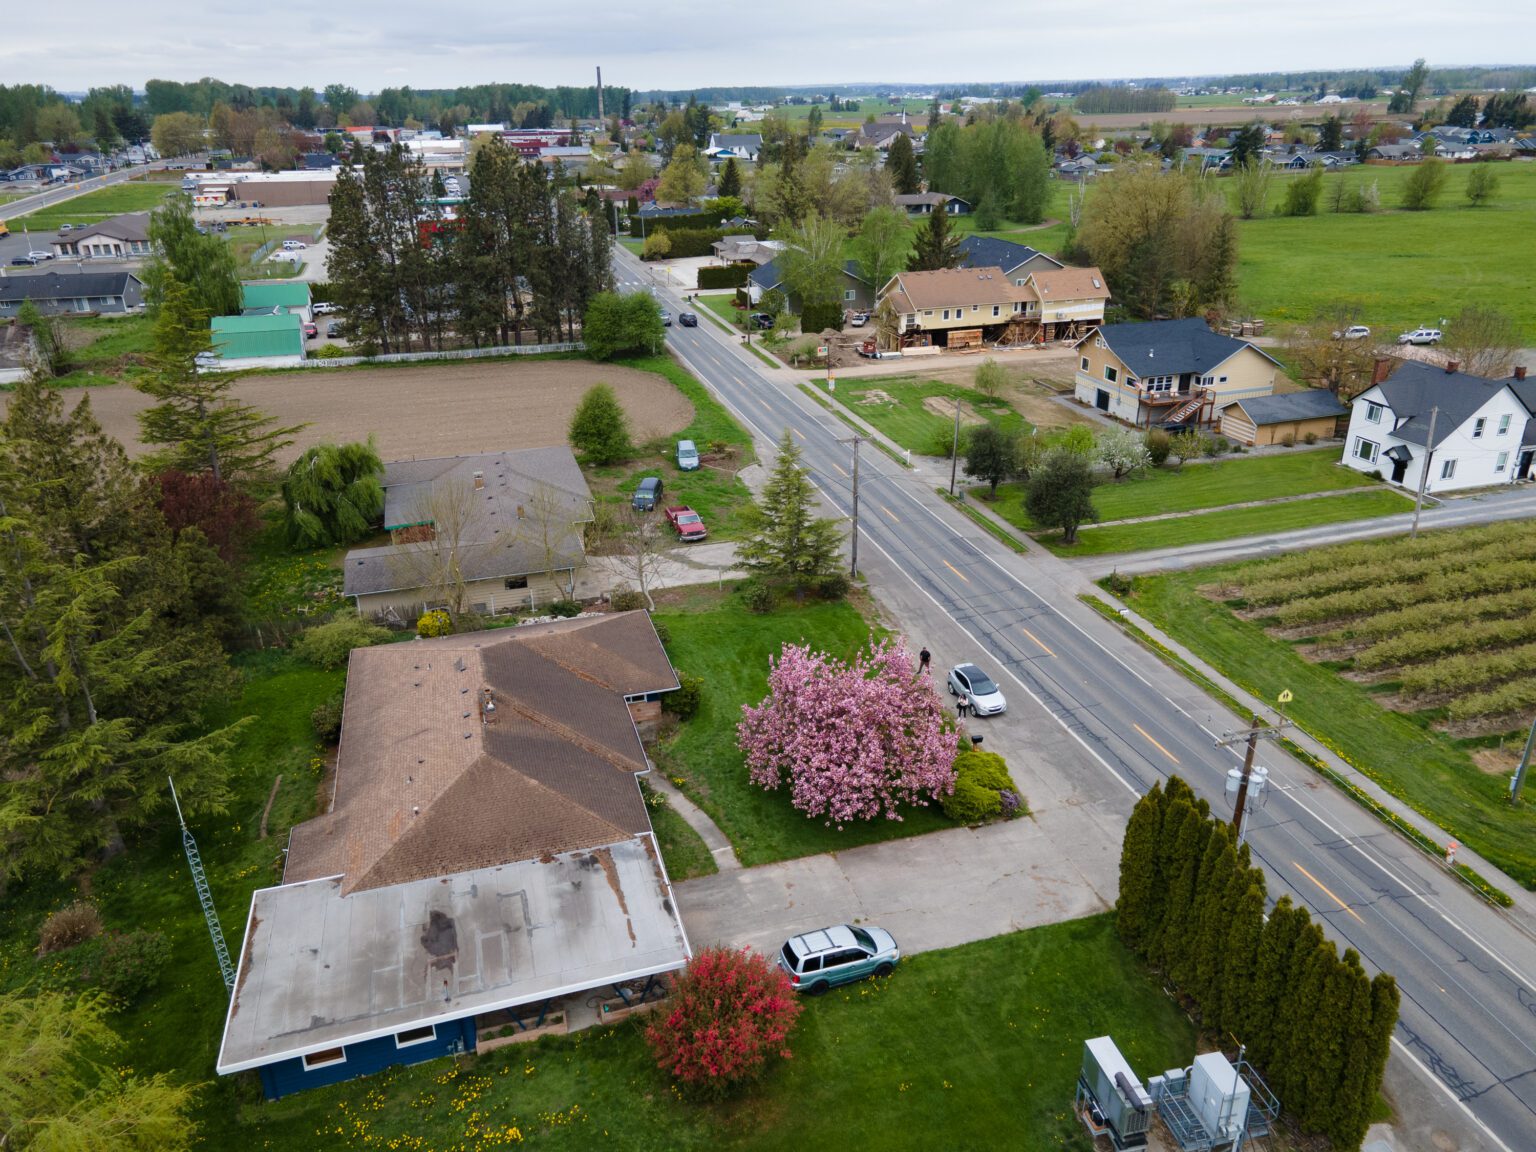 An aerial view of Everson's Main Street where residential homes line alongside the road.